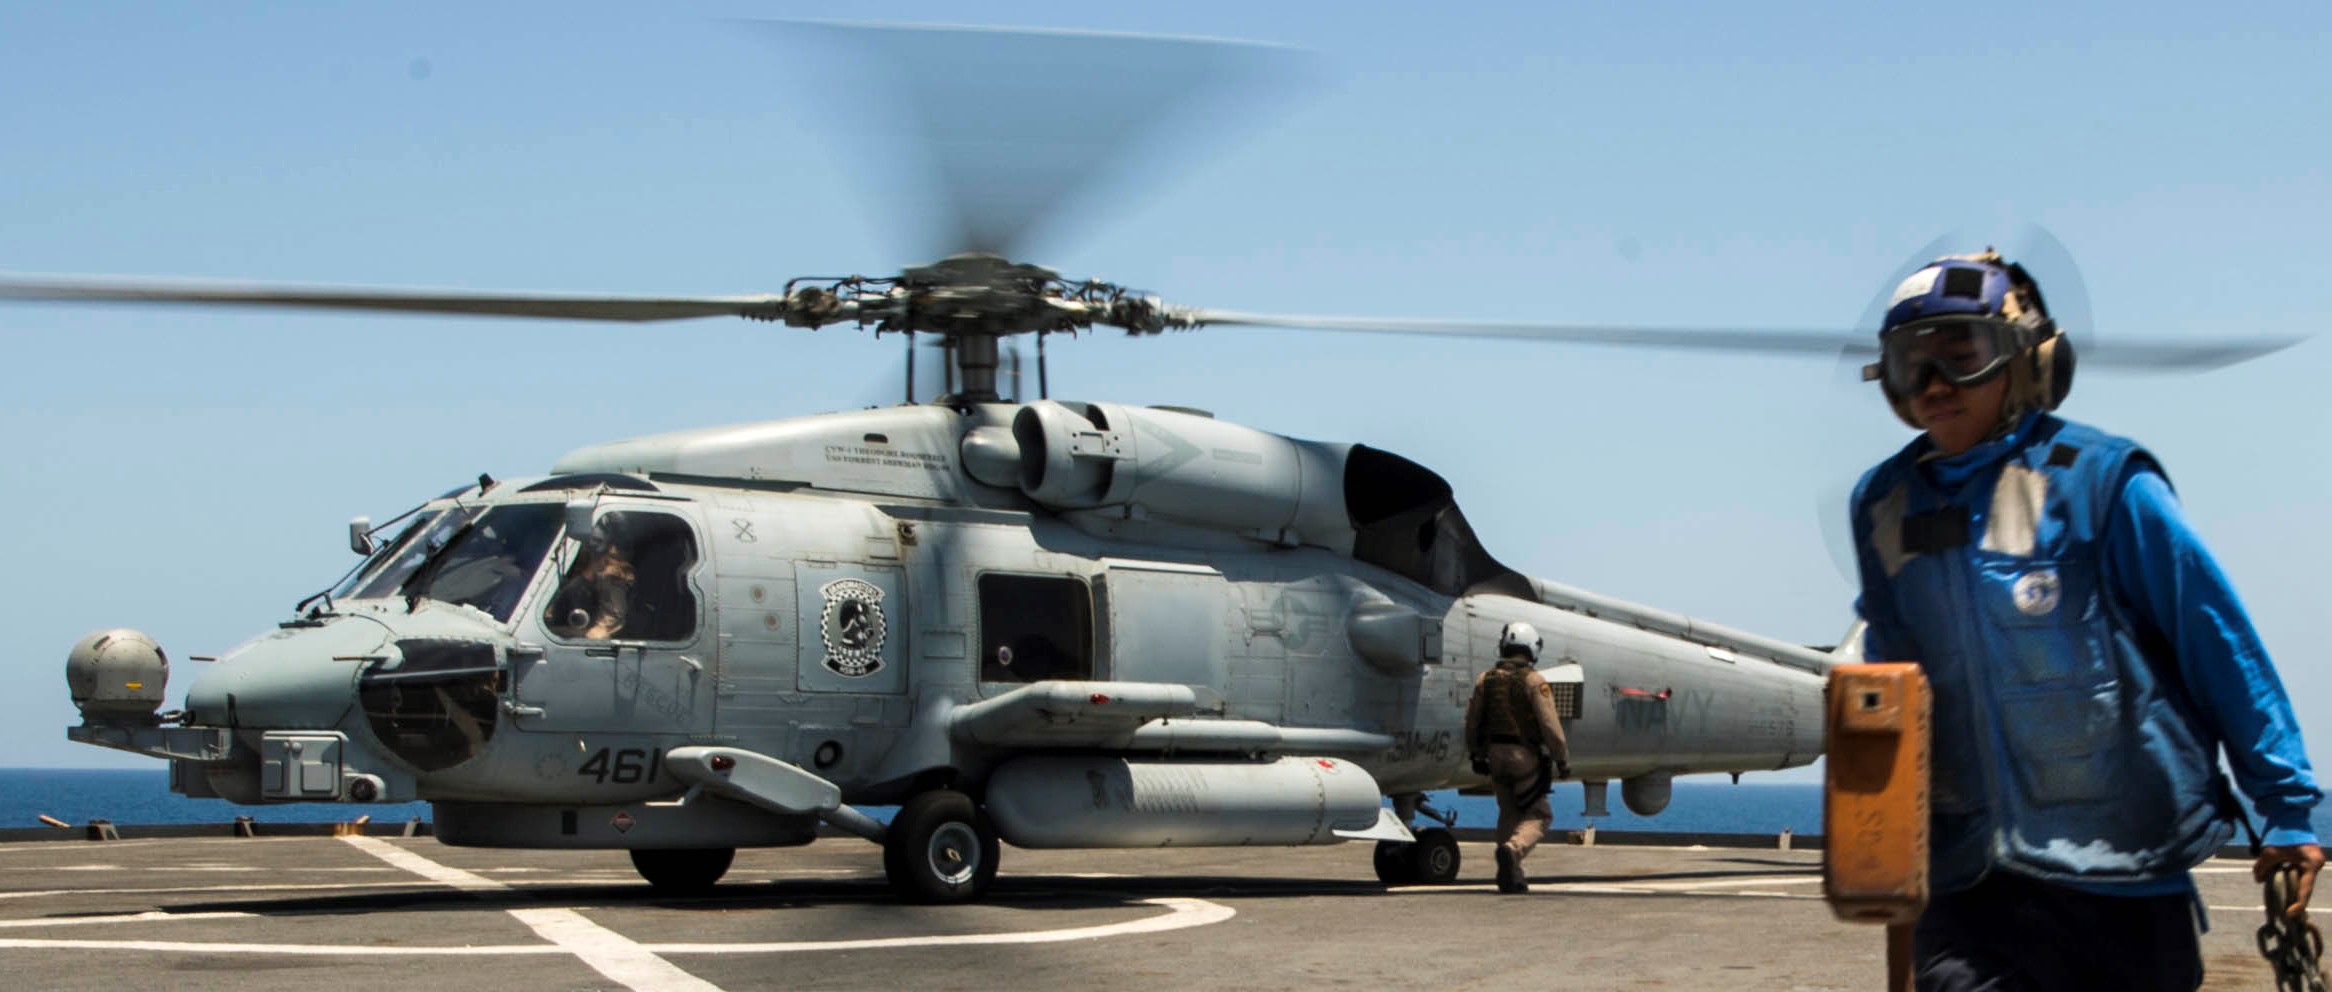 hsm-46 grandmasters helicopter maritime strike squadron mh-60r seahawk 2015 21 uss fort mchenry lsd-43